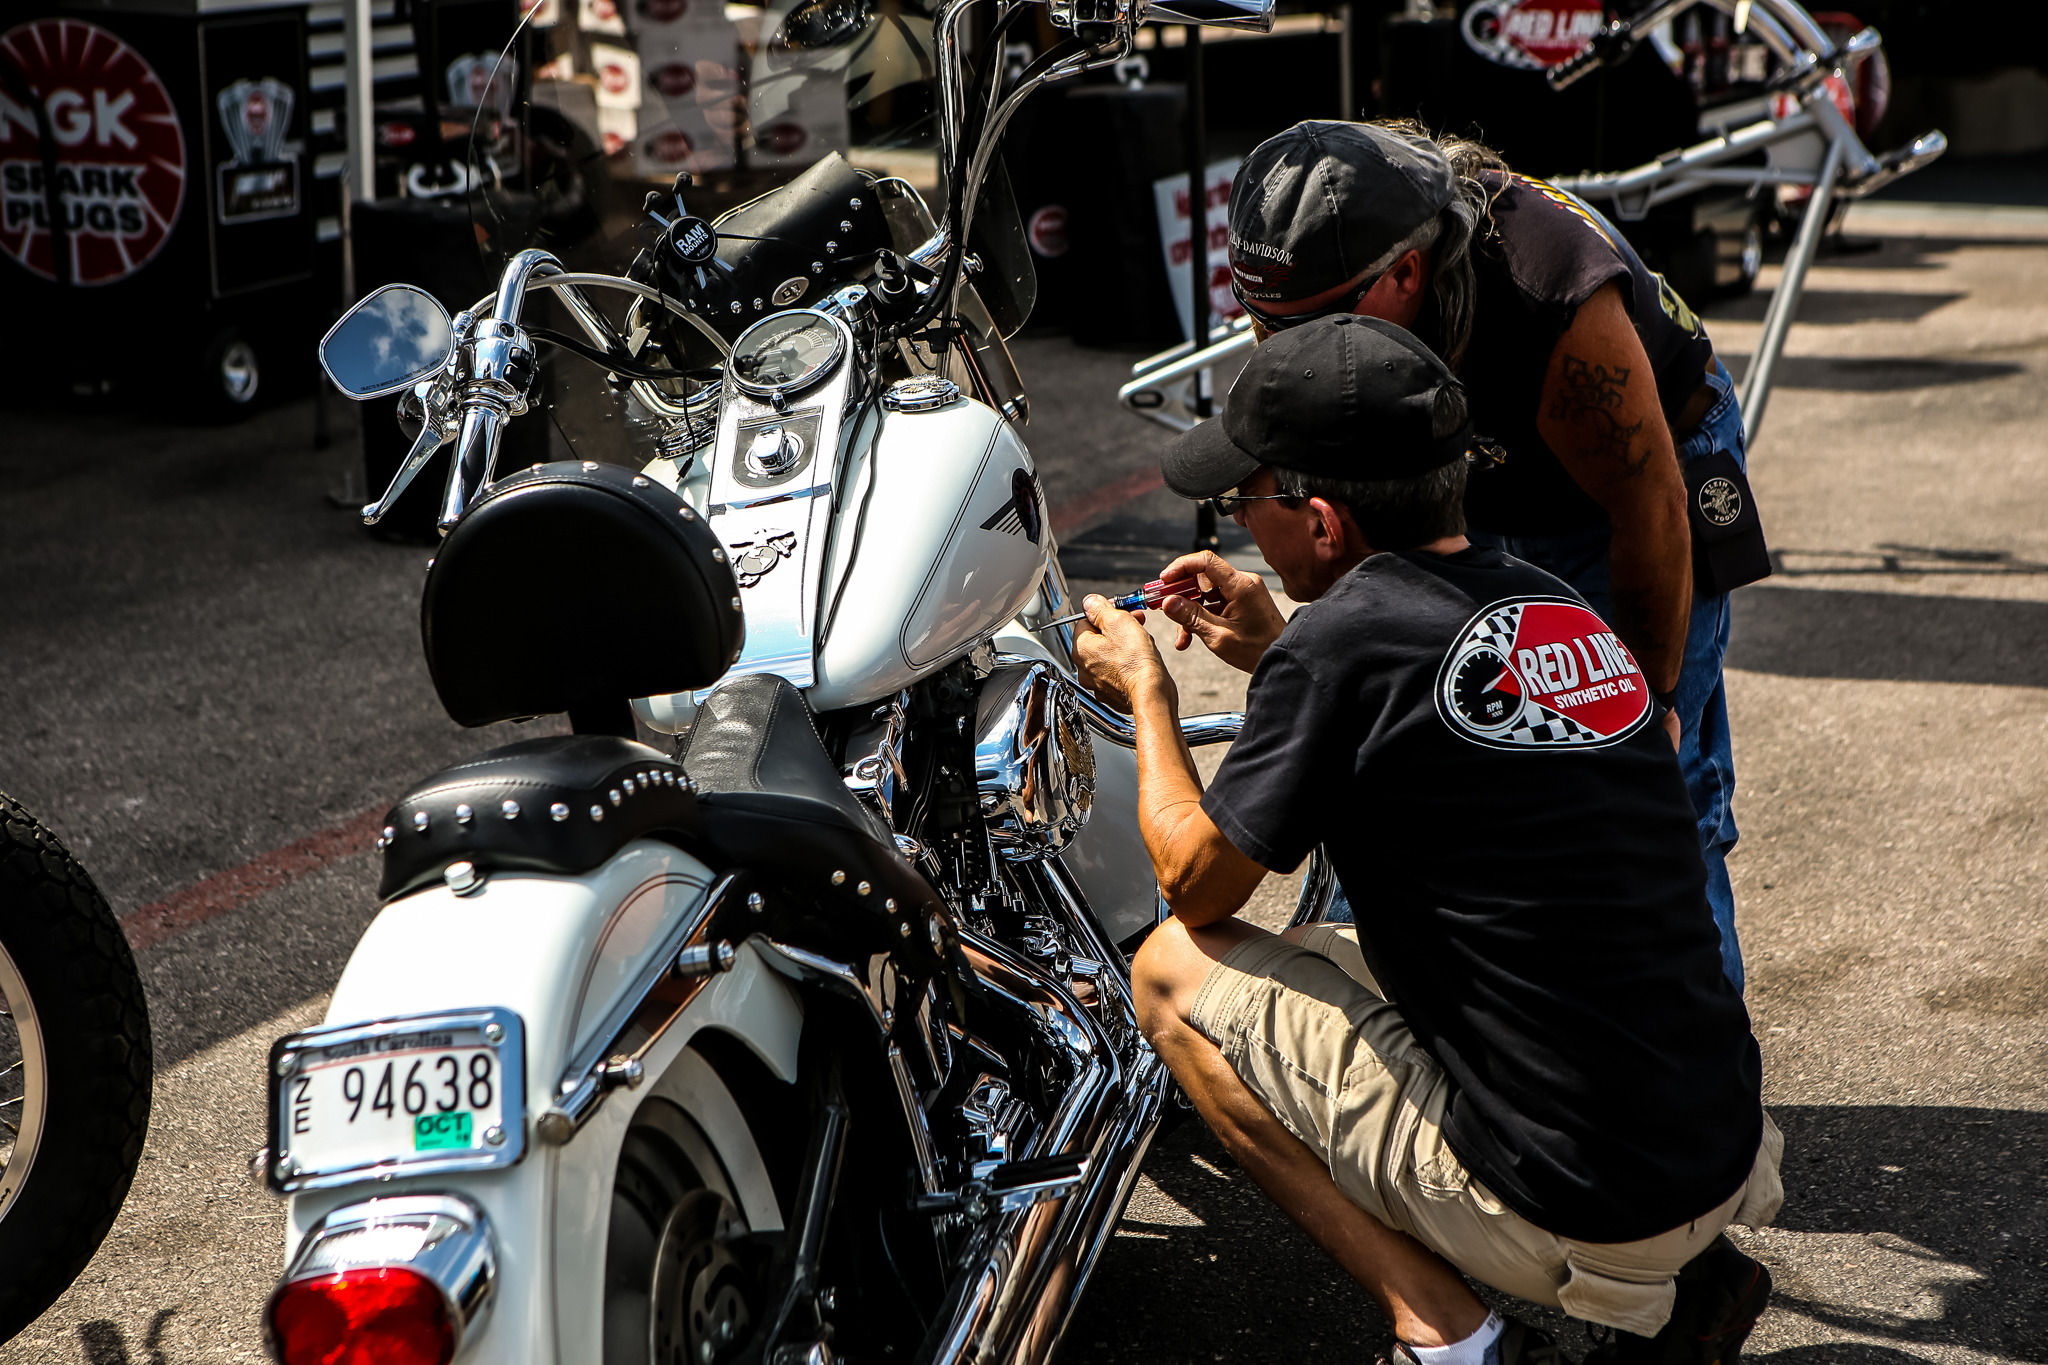 Quick tune up at the Sturgis Motorcycle Rally